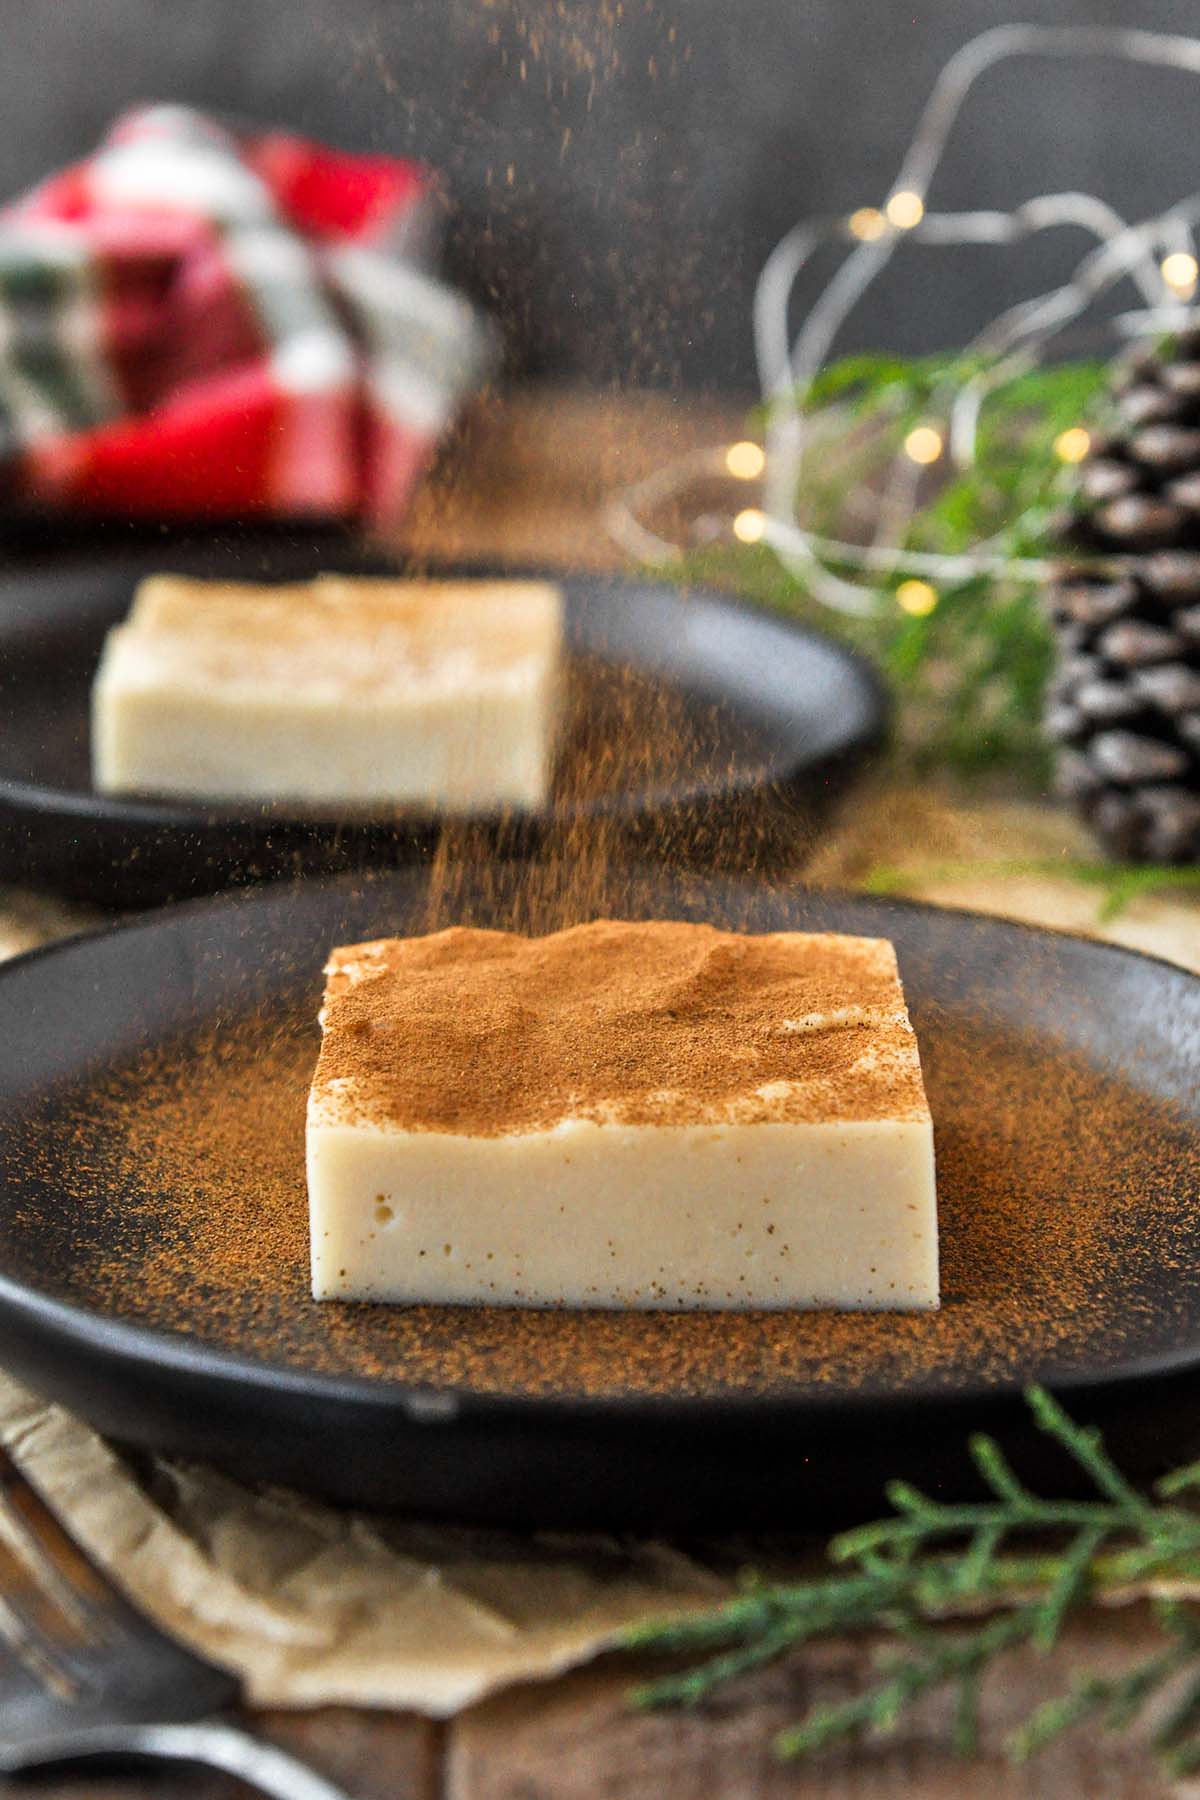 A sprinkling of cinnamon being added to a square of natilla.